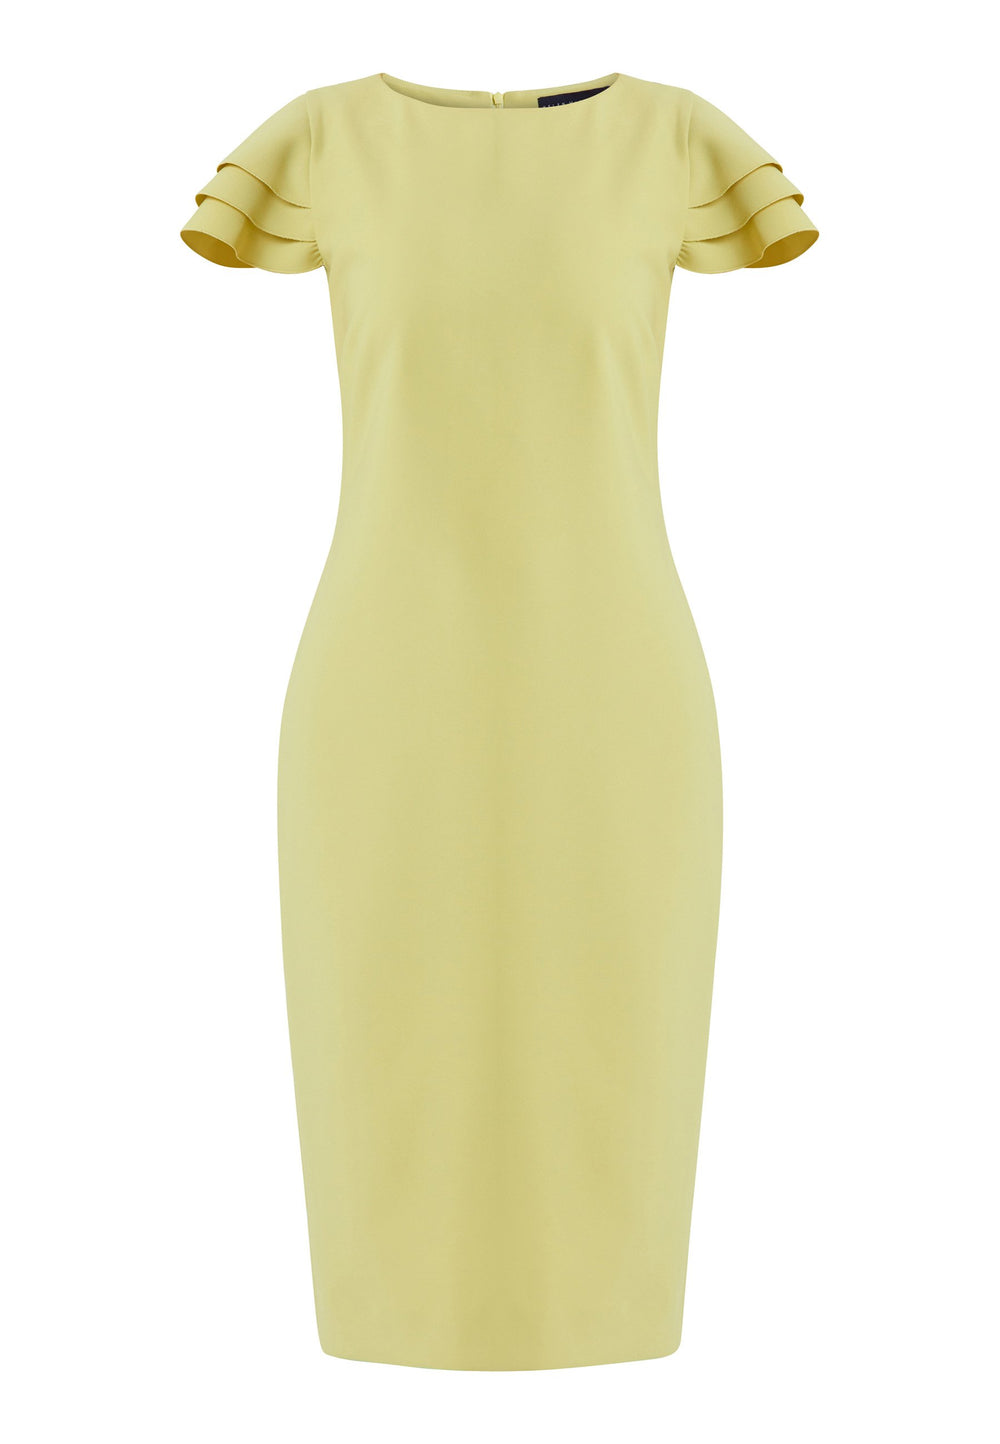 Turn Heads at your upcoming occasions In this striking citrus shift dress. Engineered with a flirty tripple tiered frill cap sleeve. Heighten the drama of this piece with your favourite accessories and heels. Attending a summer wedding? Mother of the bride? Heading to the races? This is the dress for you.